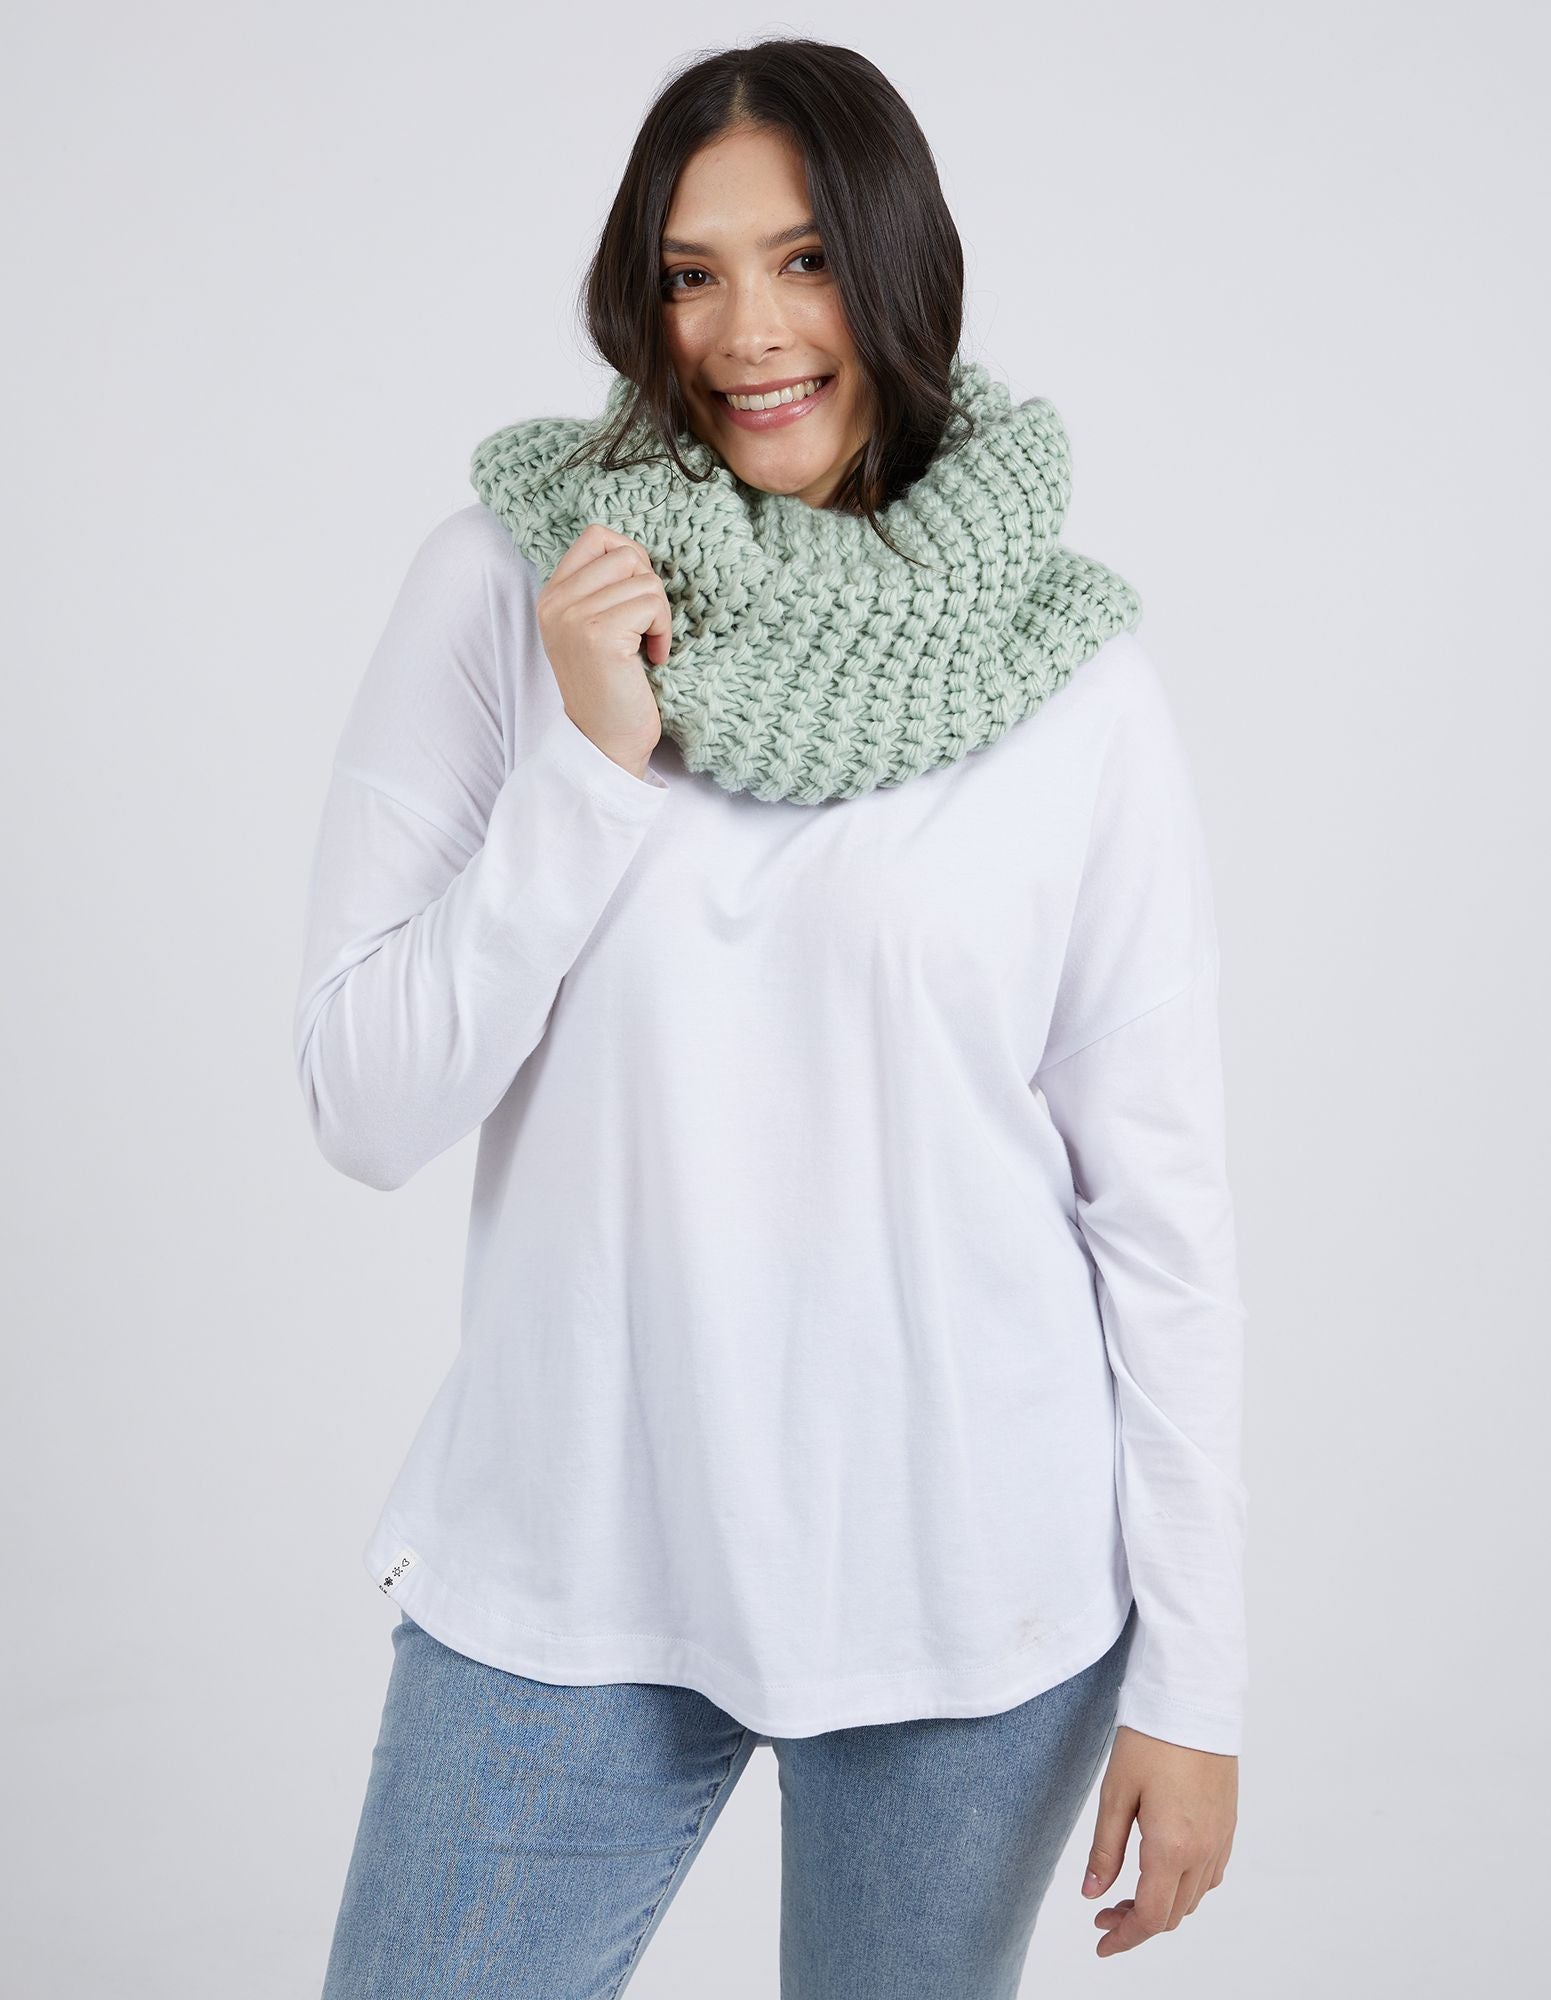 Elm Organic Loop Scarf - Little Extras Lifestyle Boutique